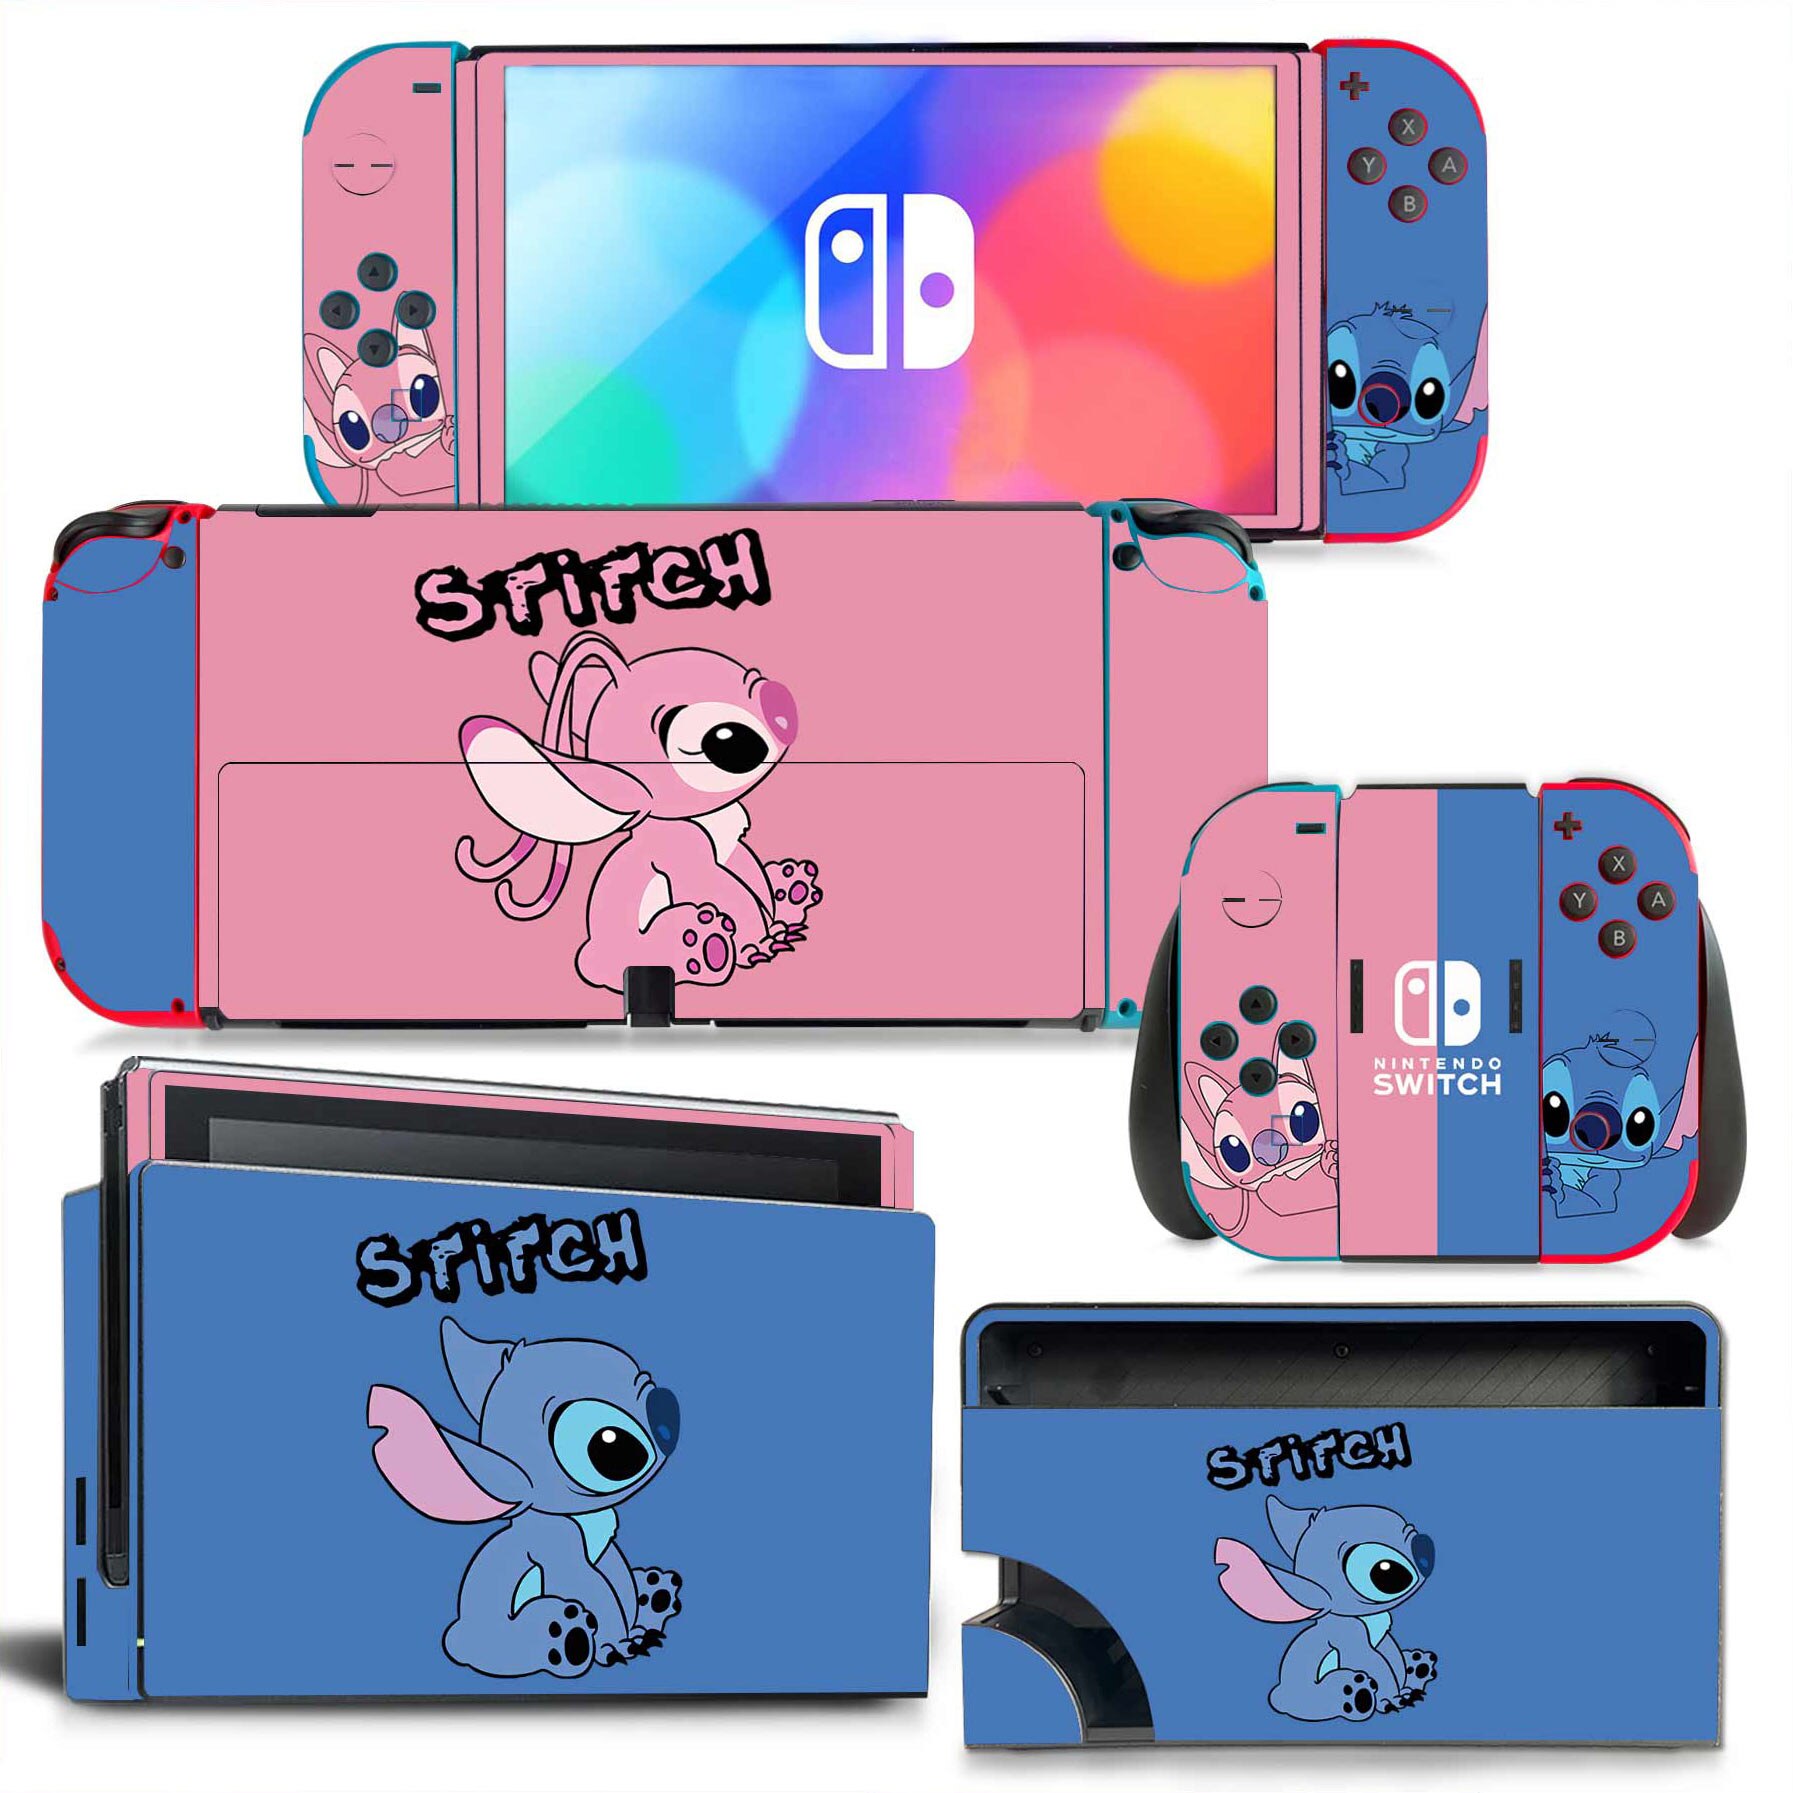 Disney Stitch Skin Cute Full Cover Sticker Decal for Switch OLED Console Joy-con Controller Dock Skin Vinyl Protective Film